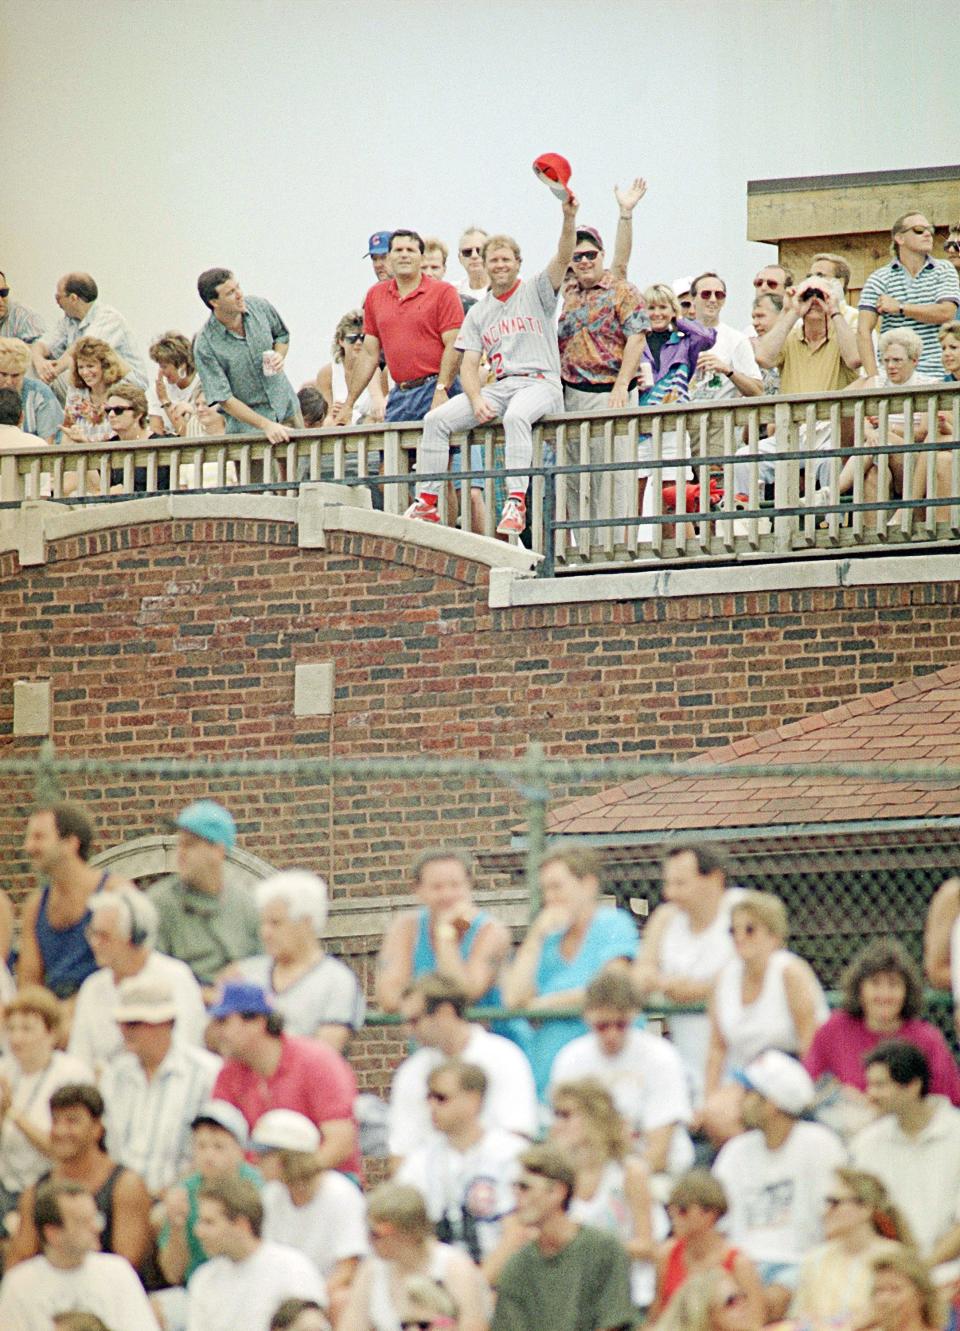 Cincinnati Reds pitcher Tom Browning, center, waves from a roof on Sheffield Avenue across from Wrigley Field in Chicago as he watches the Reds' game against the Chicago Cubs, July 7, 1993.  Browning was not scheduled to pitch.